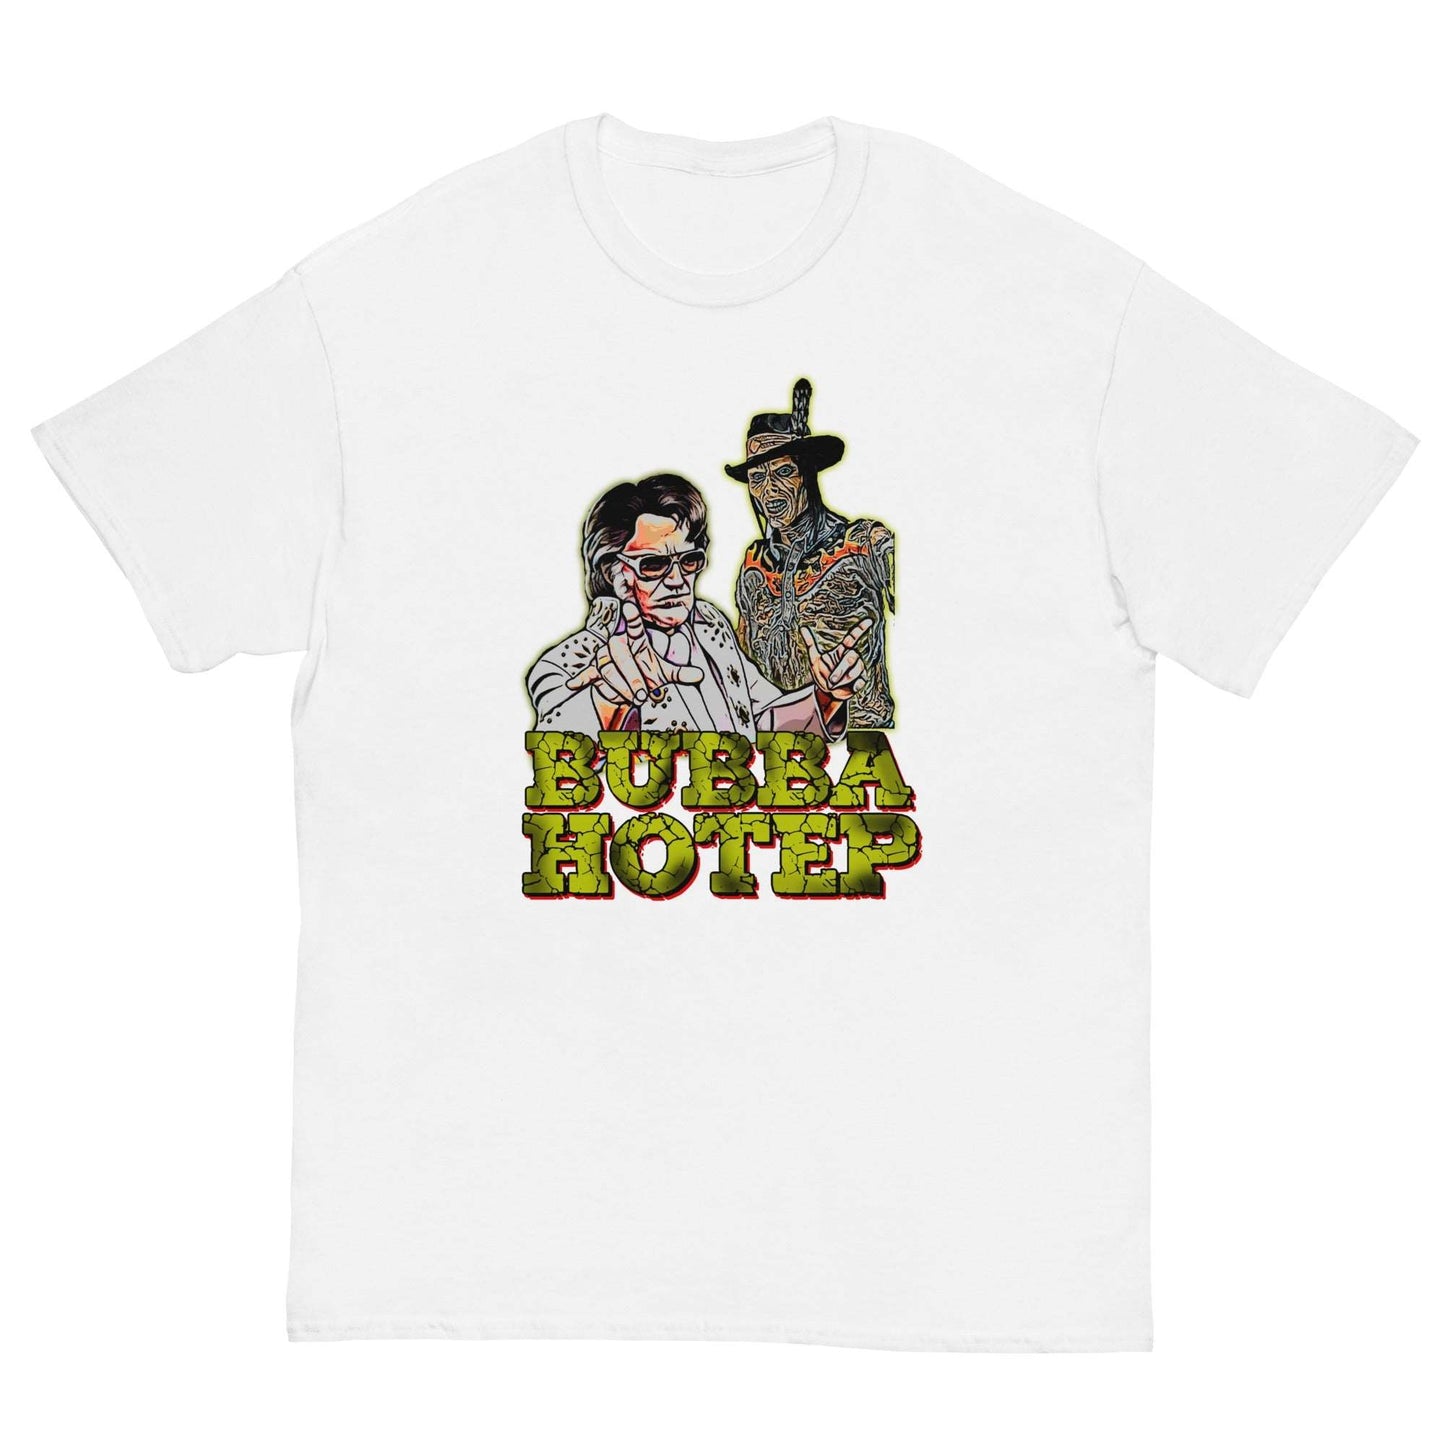 Bubba Ho-Tep T-Shirt - Quirky Tee for Movie Buffs - thenightmareinc